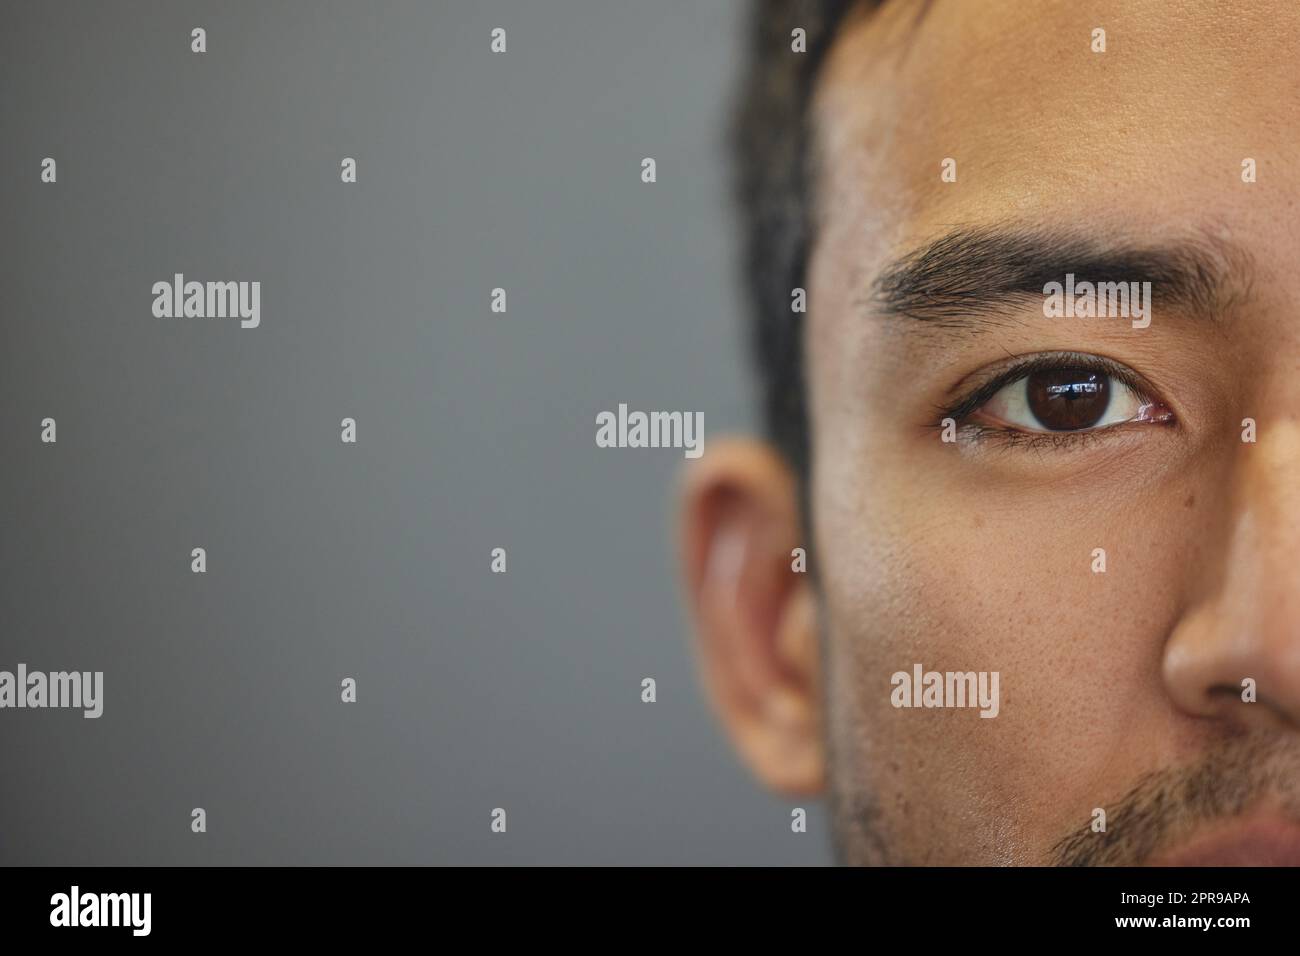 Look me in the eye. a handsome young man standing against a grey background. Stock Photo